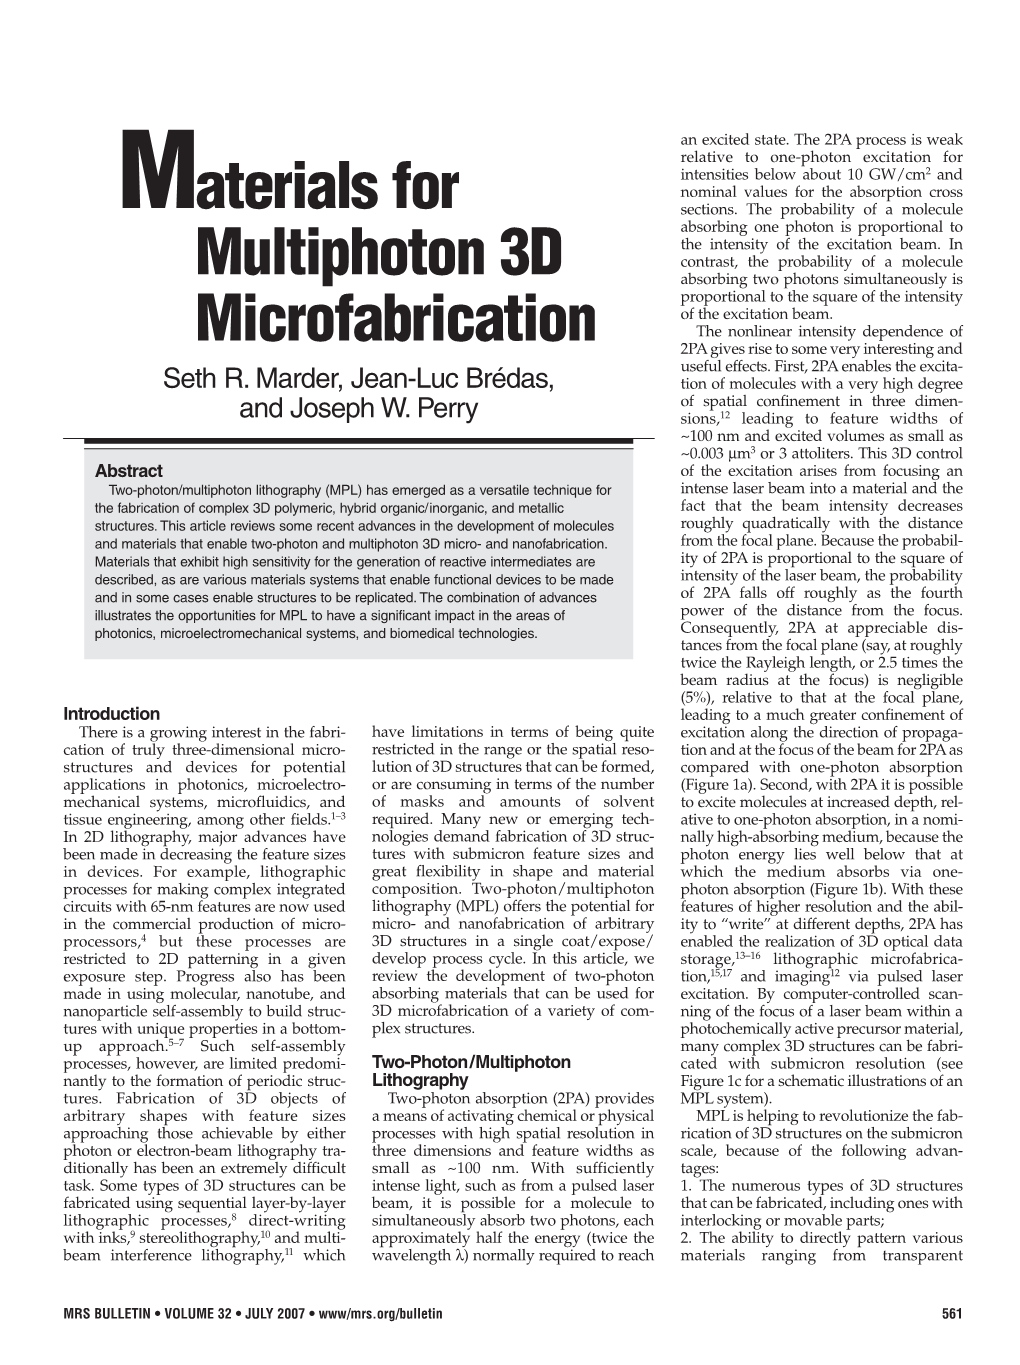 Materials for Multiphoton 3D Microfabrication